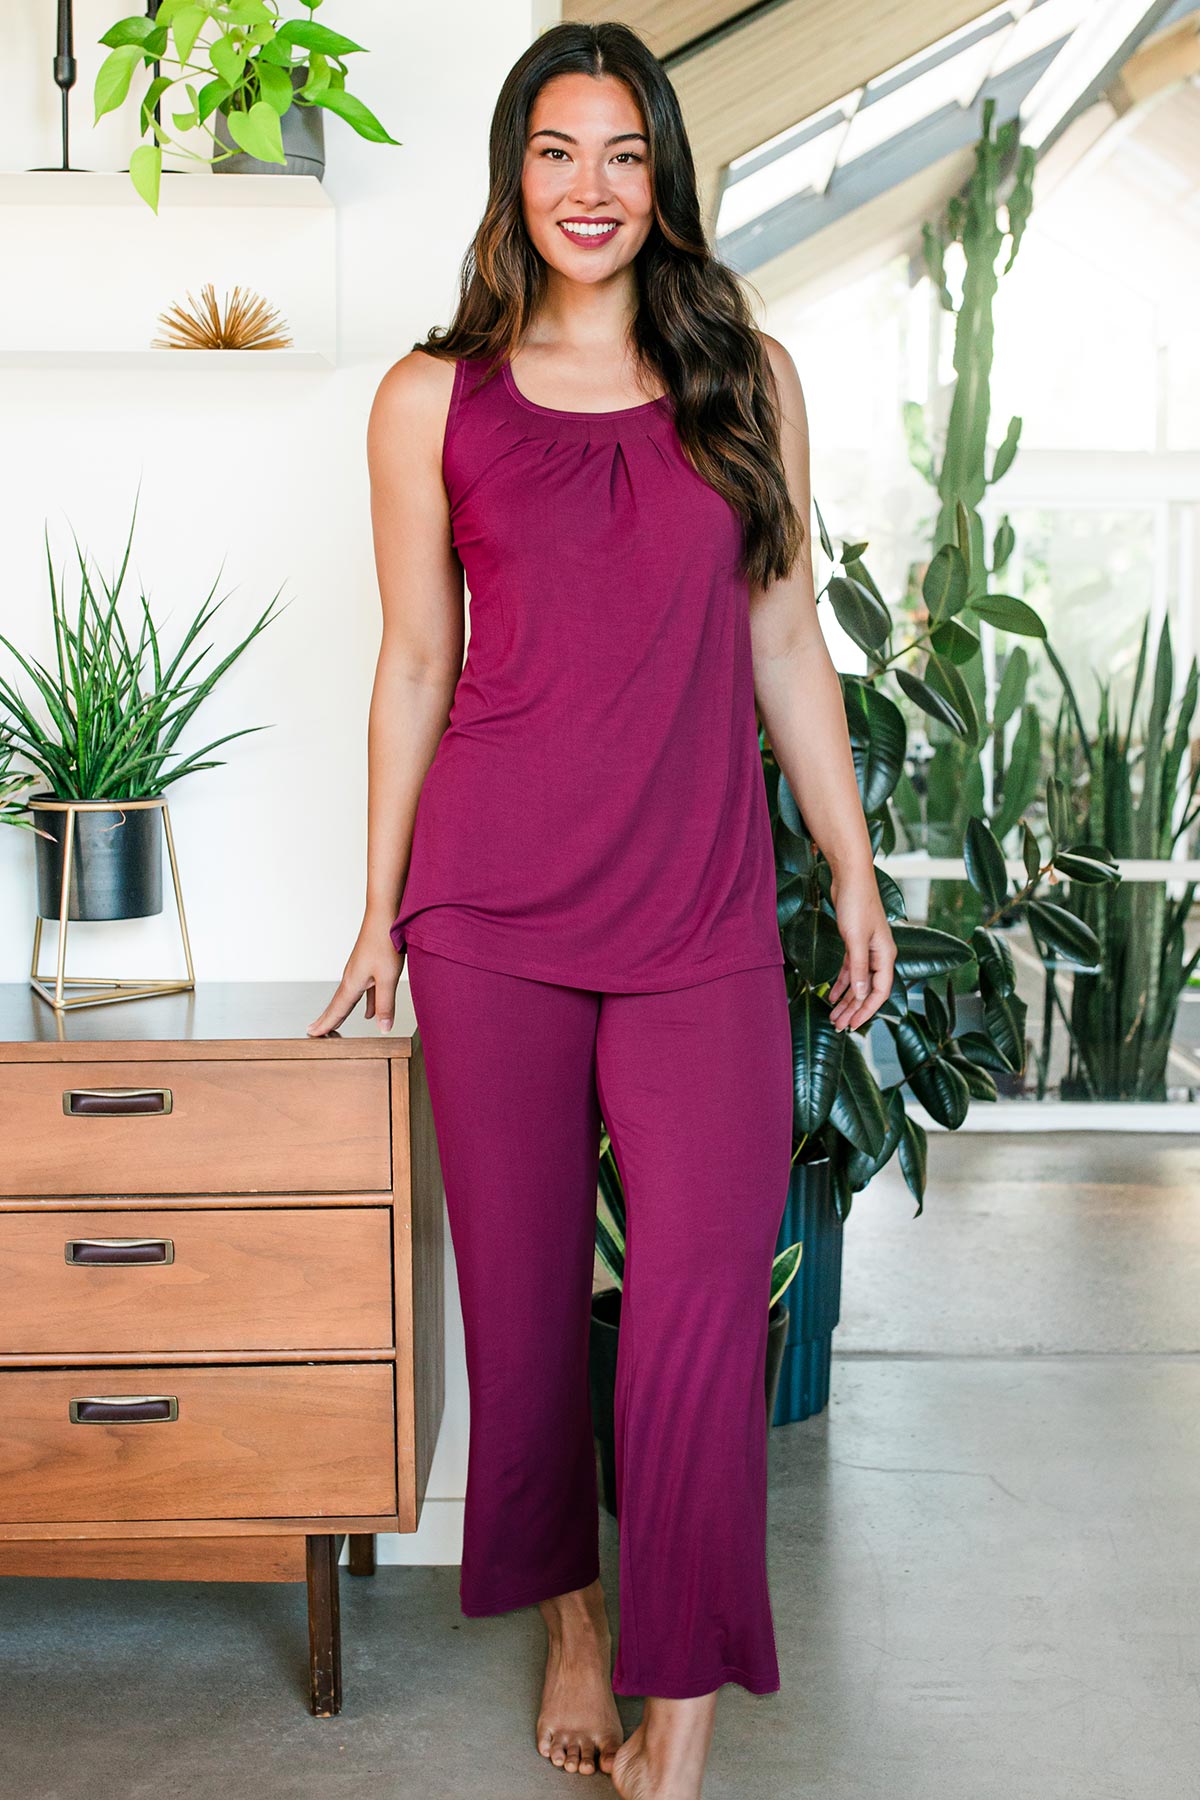 A woman standing and smiling with one leg forward and slightly bent, wearing Yala Delia Gathered Tank Bamboo Pajama Set in Boysenberry